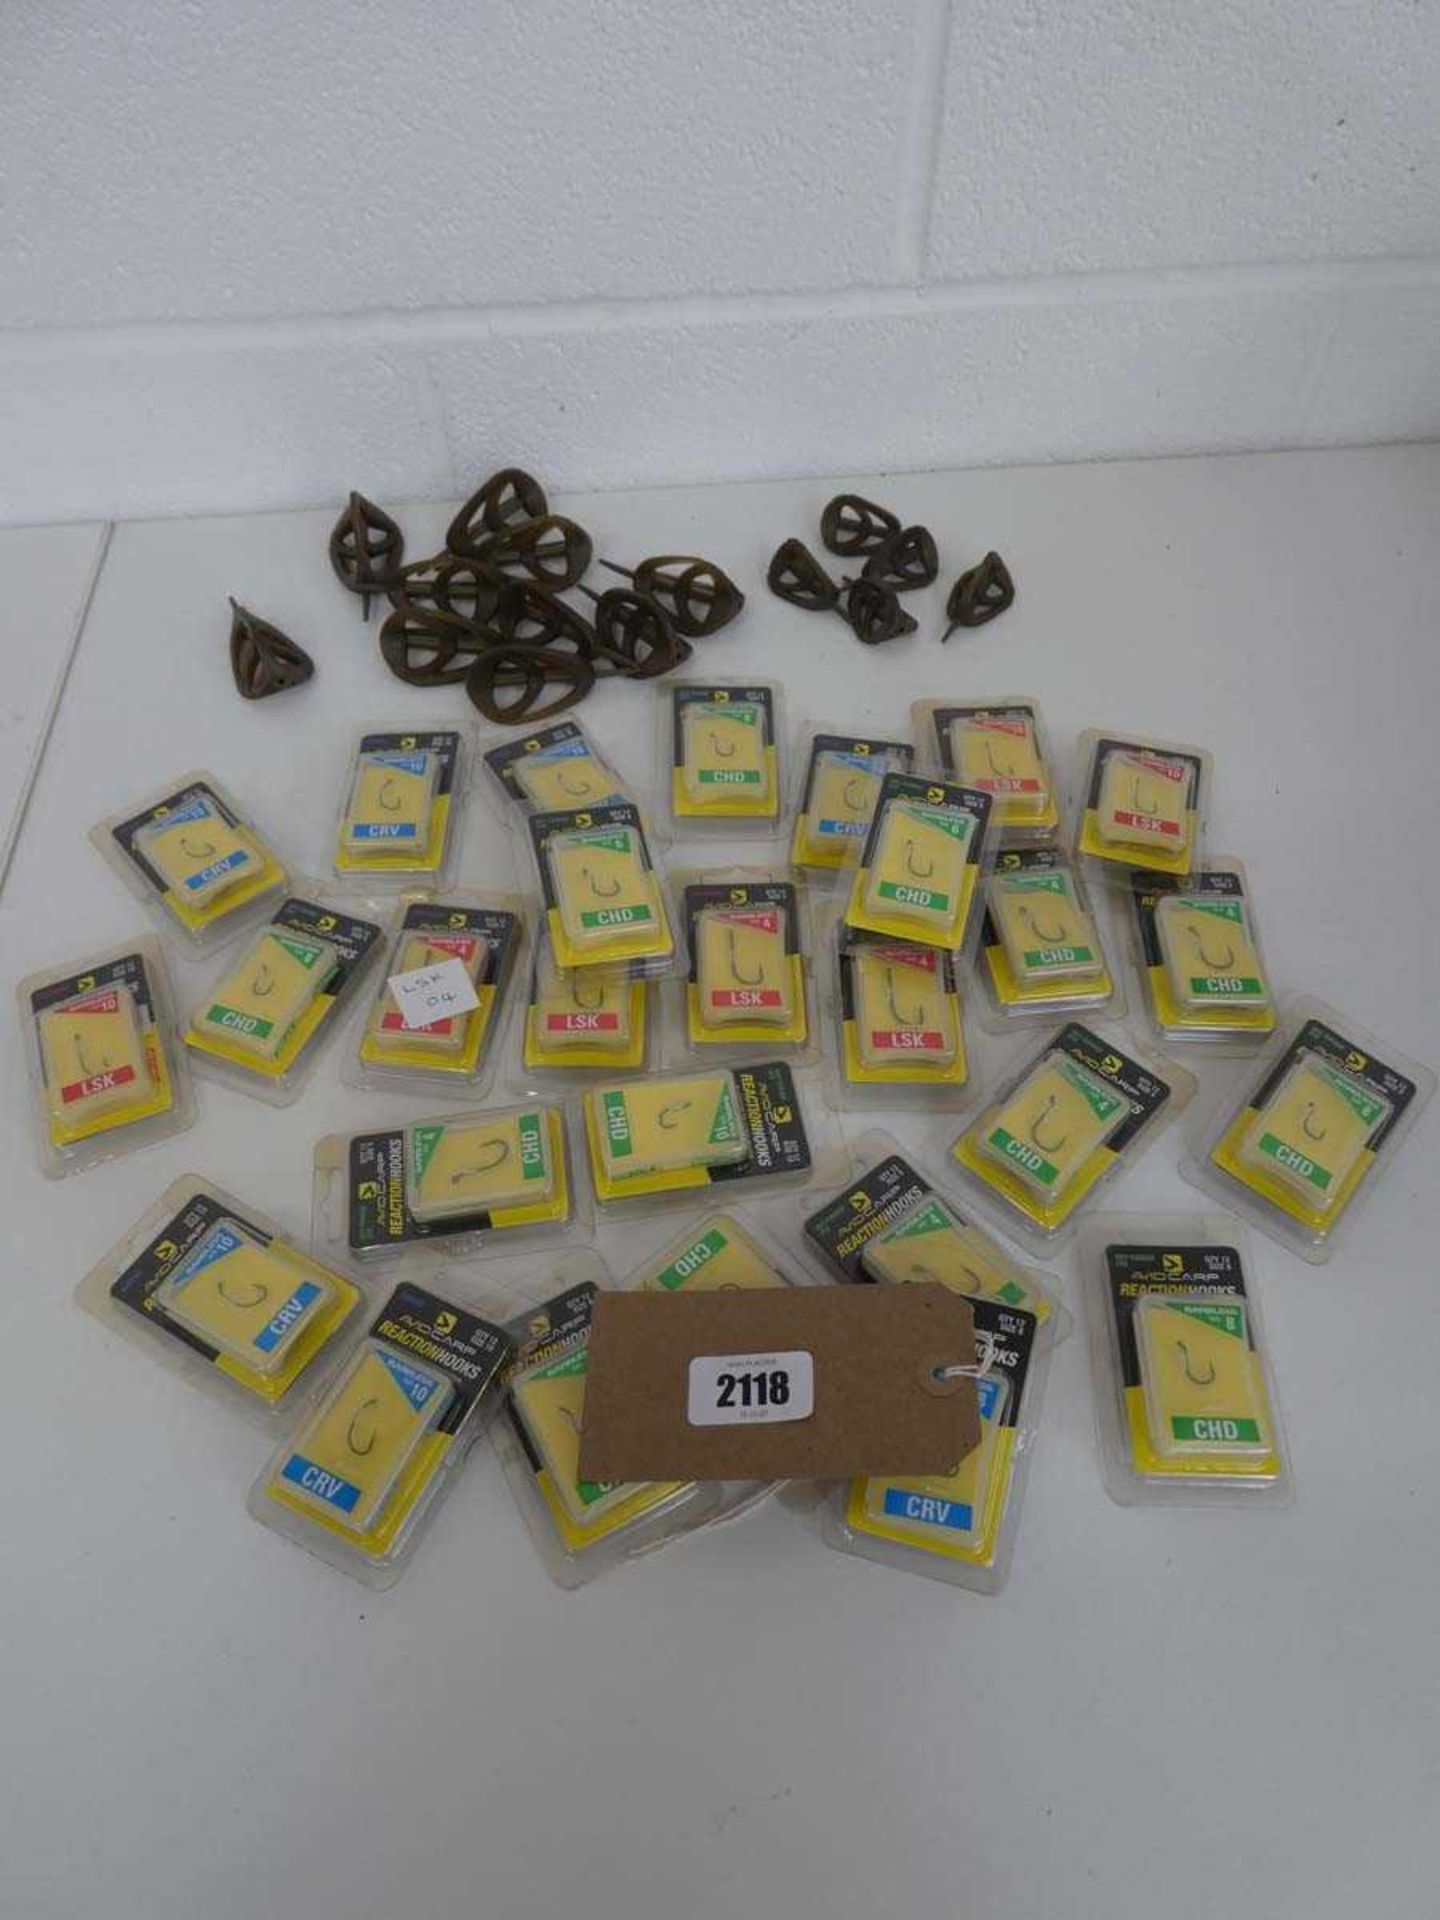 Quantity of Avid Carp reaction hooks (from sizes 4-10) with styles incl. curved, chod, longshank,